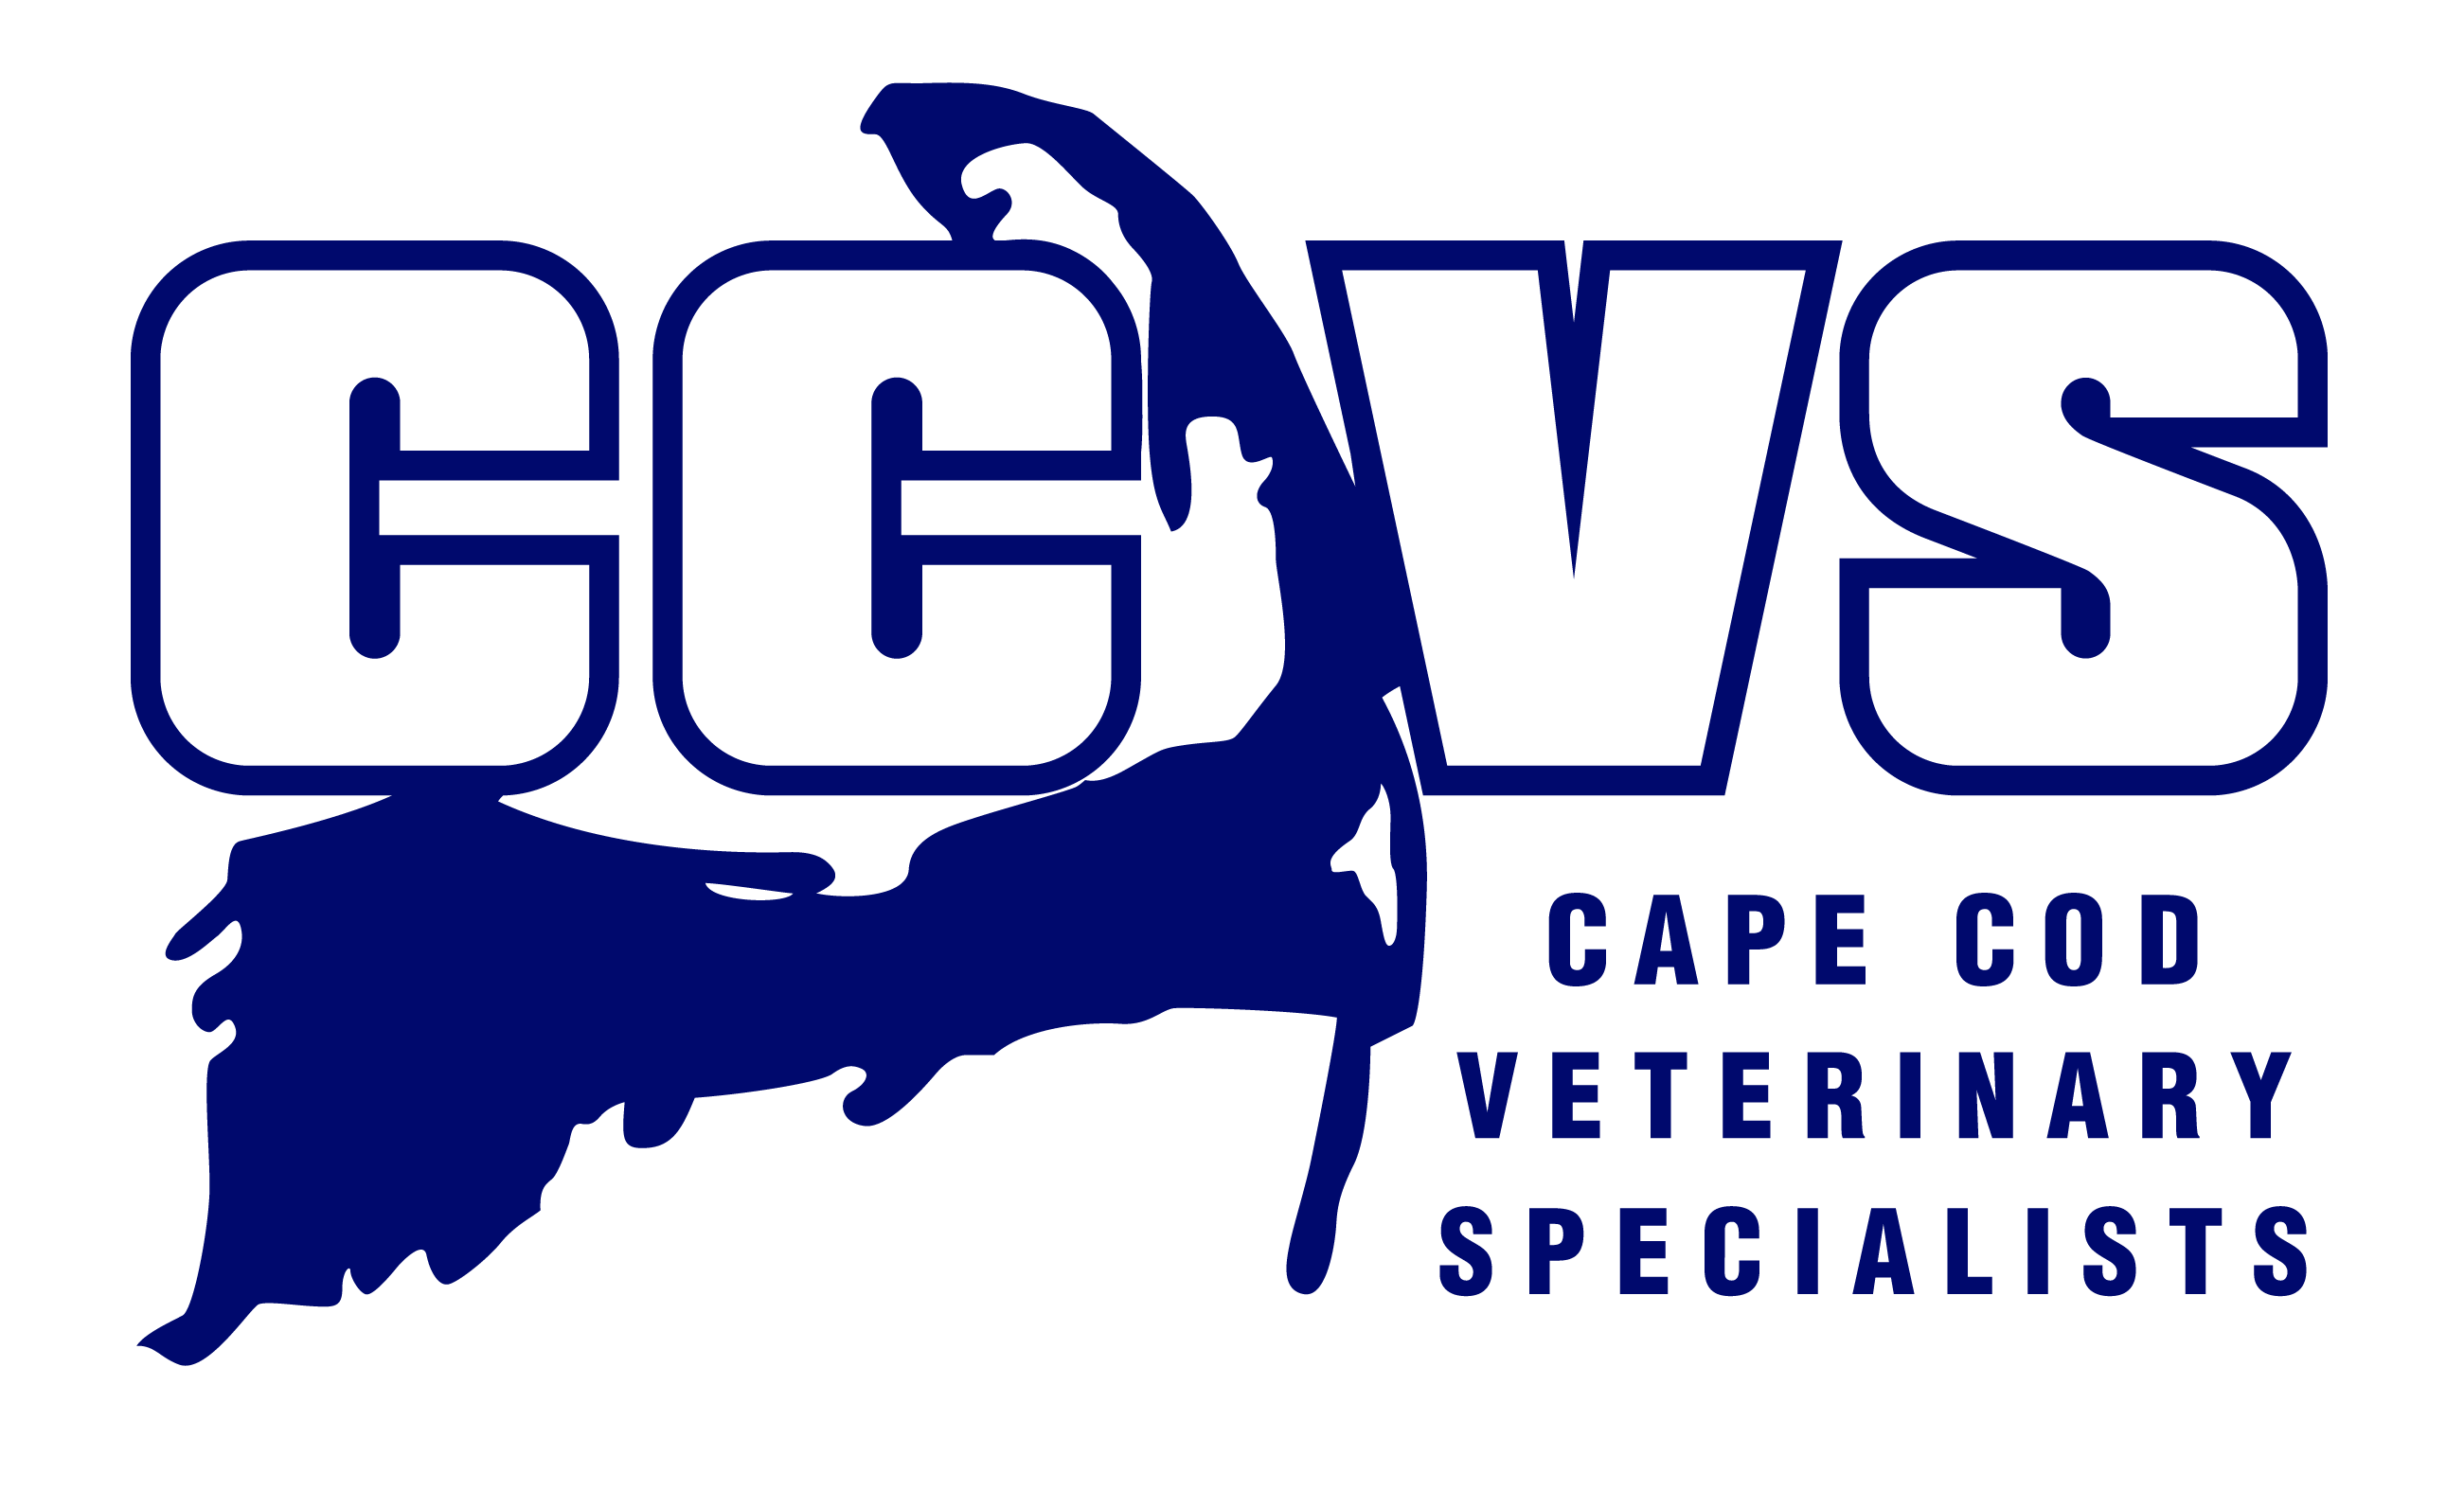 Cape Cod Veterinary Specialists